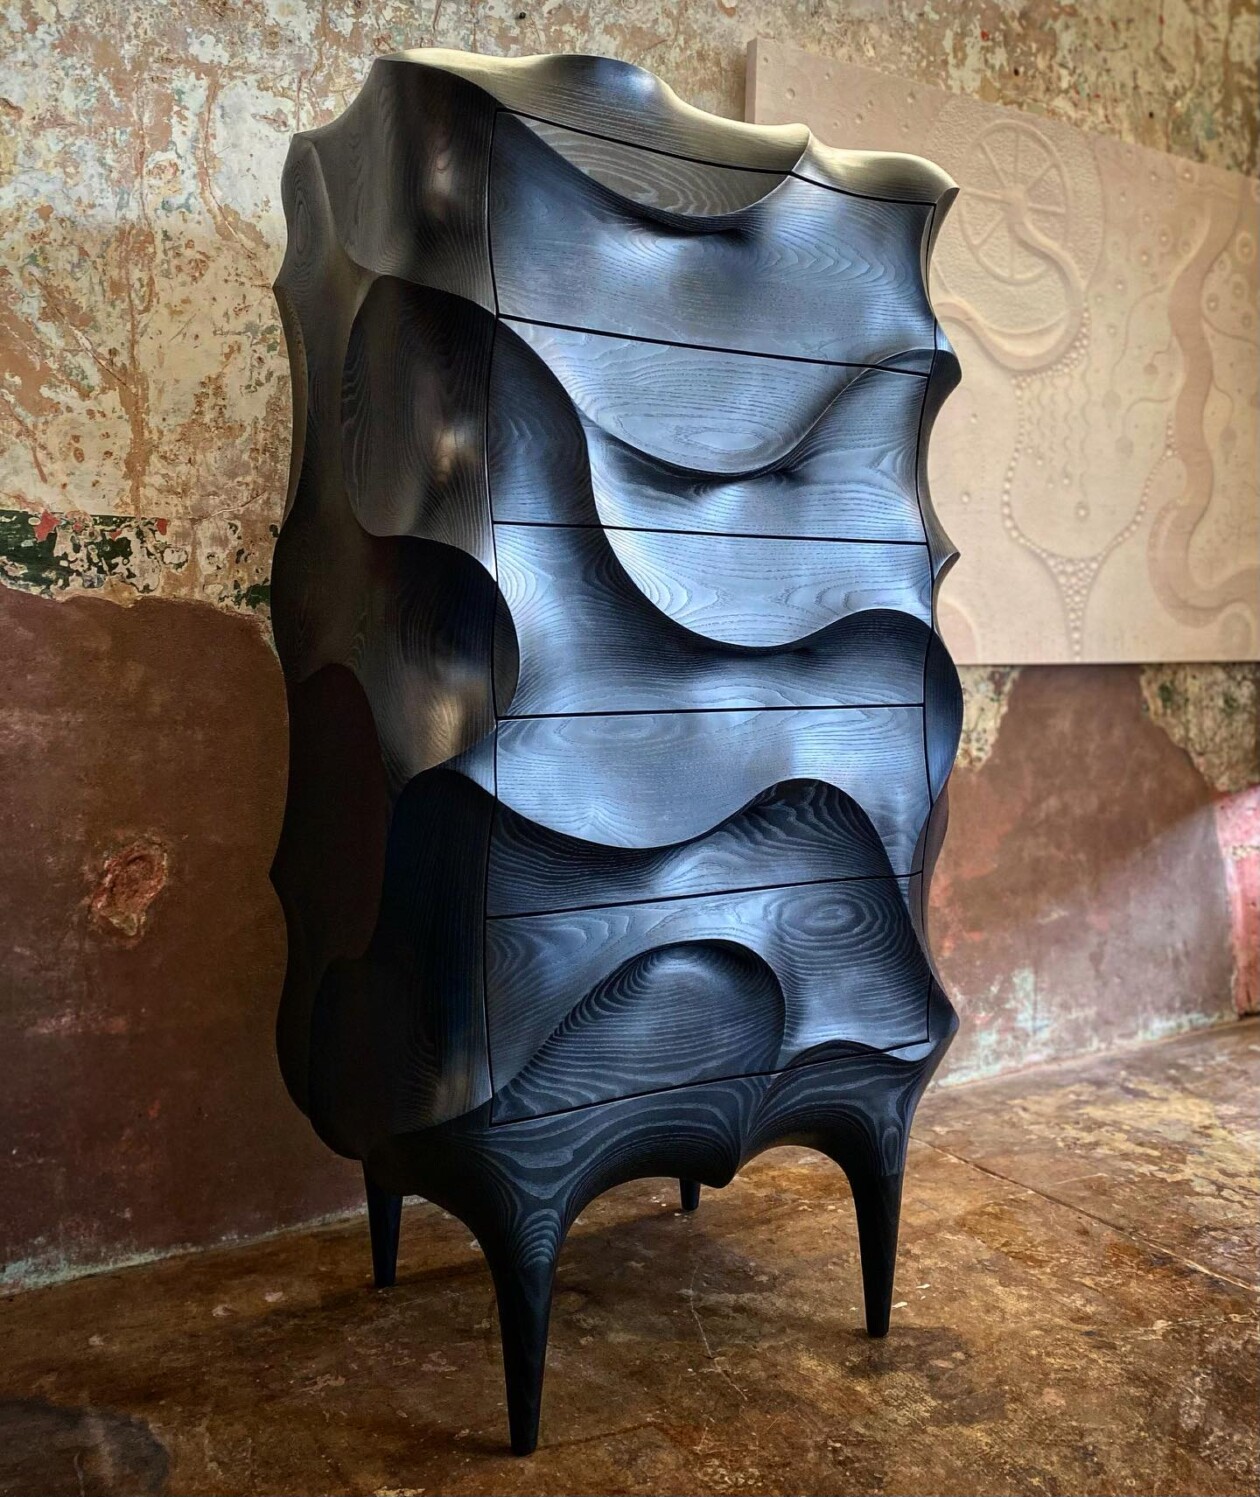 Intricately Engraved And Textured Organic Shaped Furniture By Caleb Woodard (5)